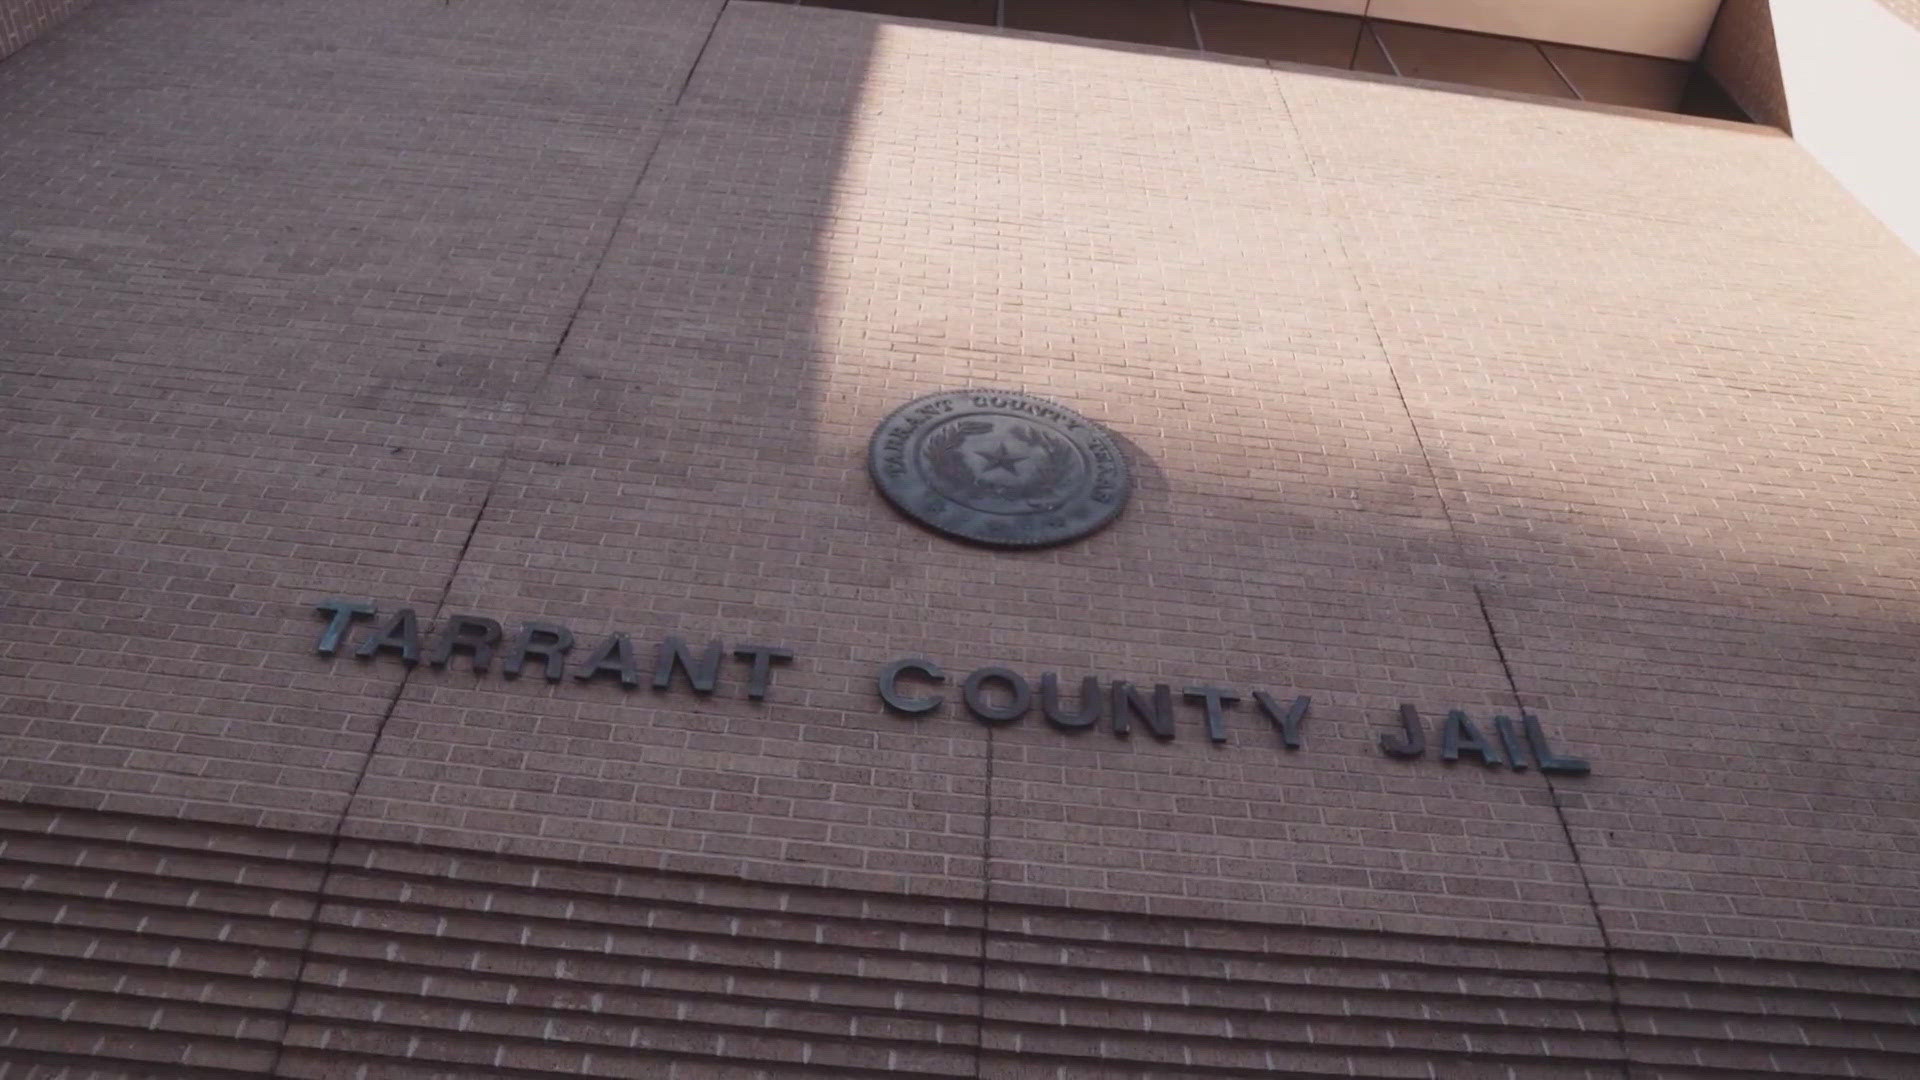 Calls for change at the Tarrant County Jail have grown since the death of Anthony Johnson in April.